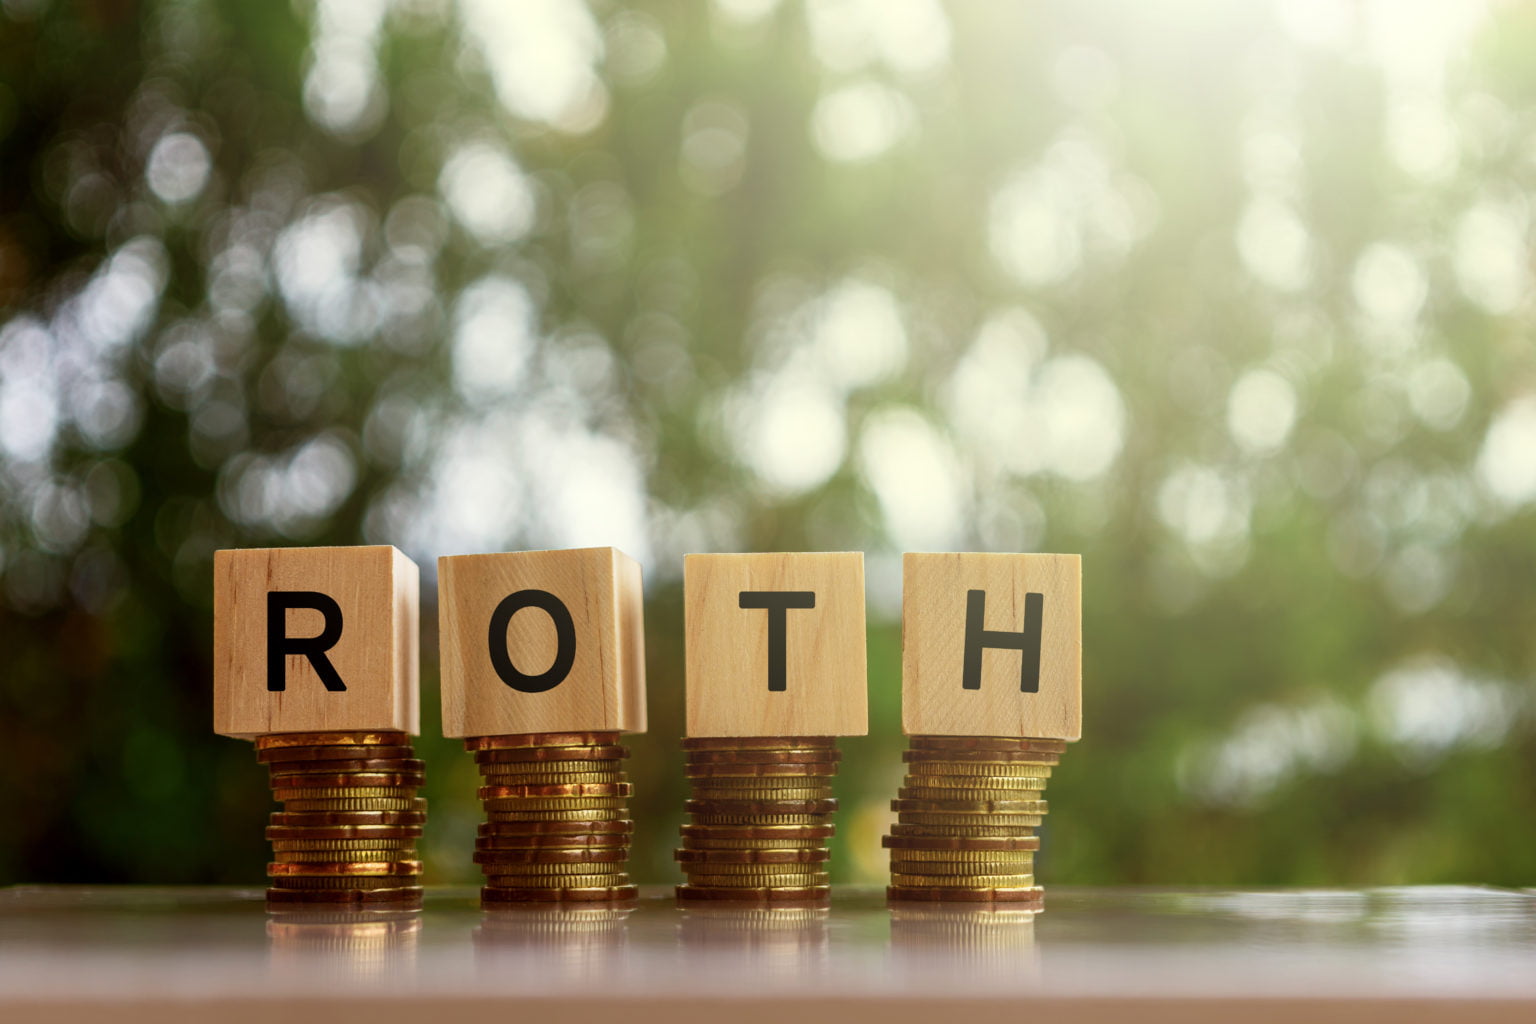 Roth blocks on coin stacks